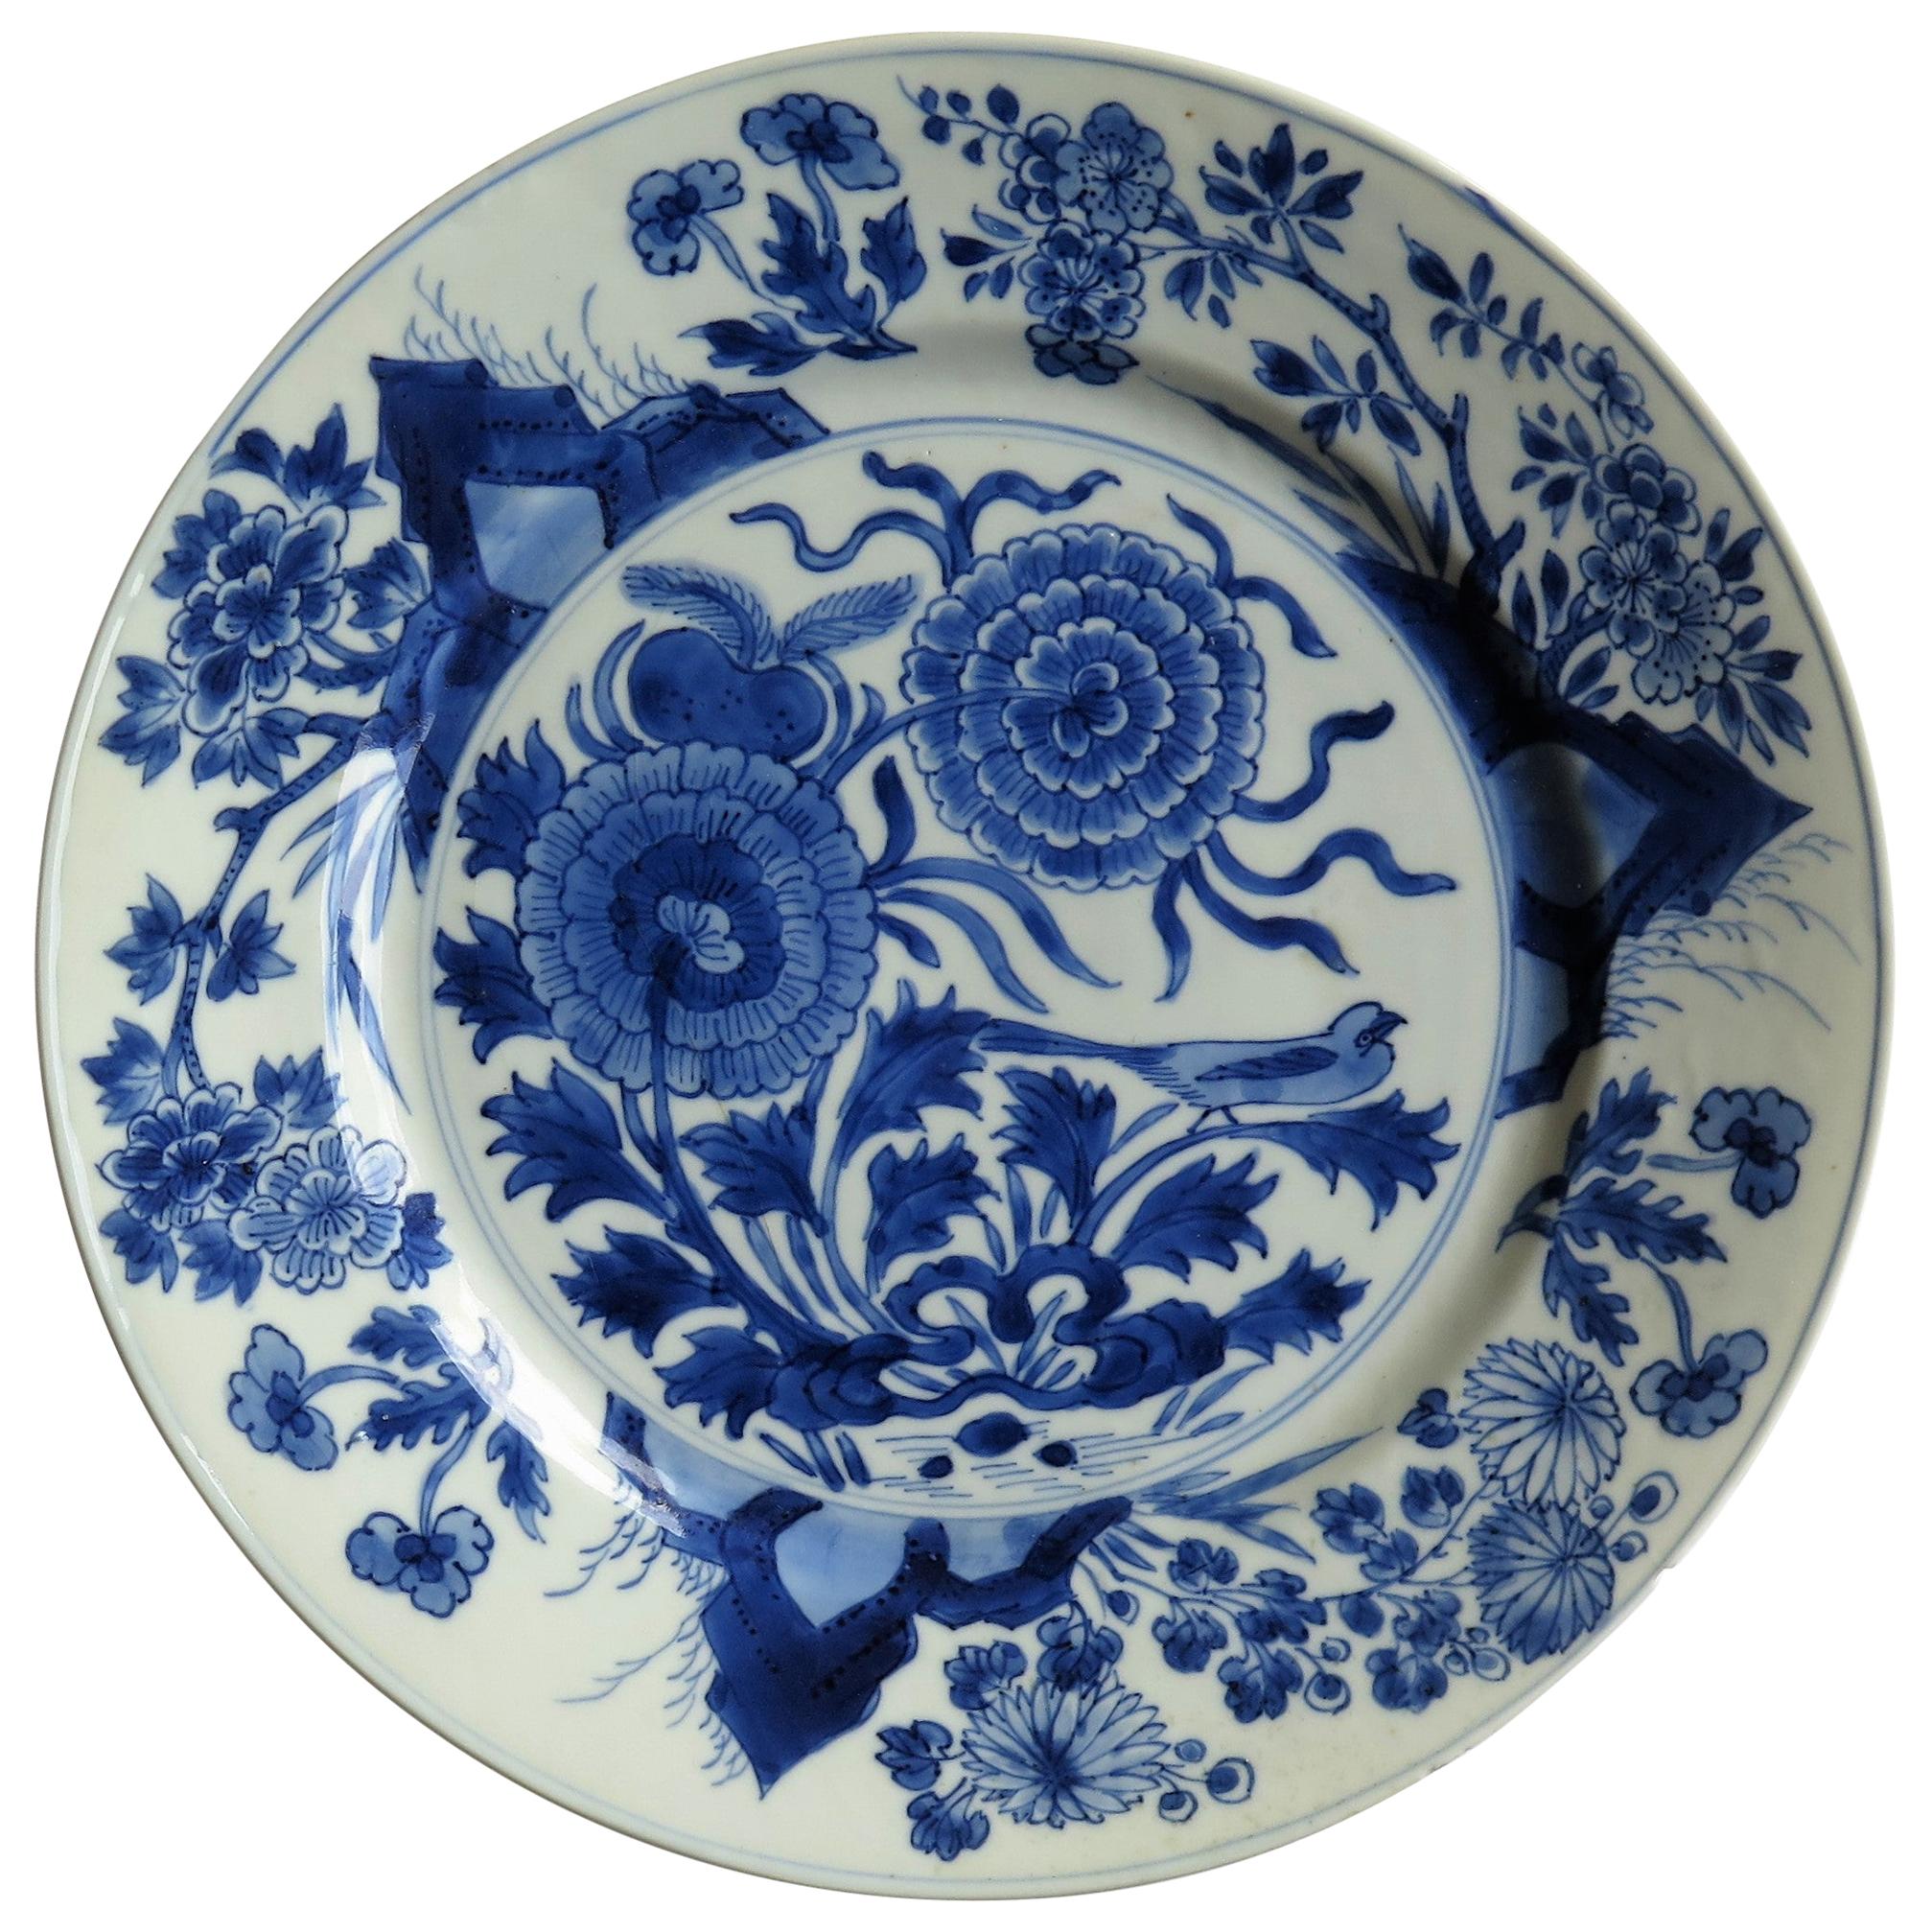 Fine Chinese Porcelain Blue and White Plate, Kangxi Period & Mark, circa 1700